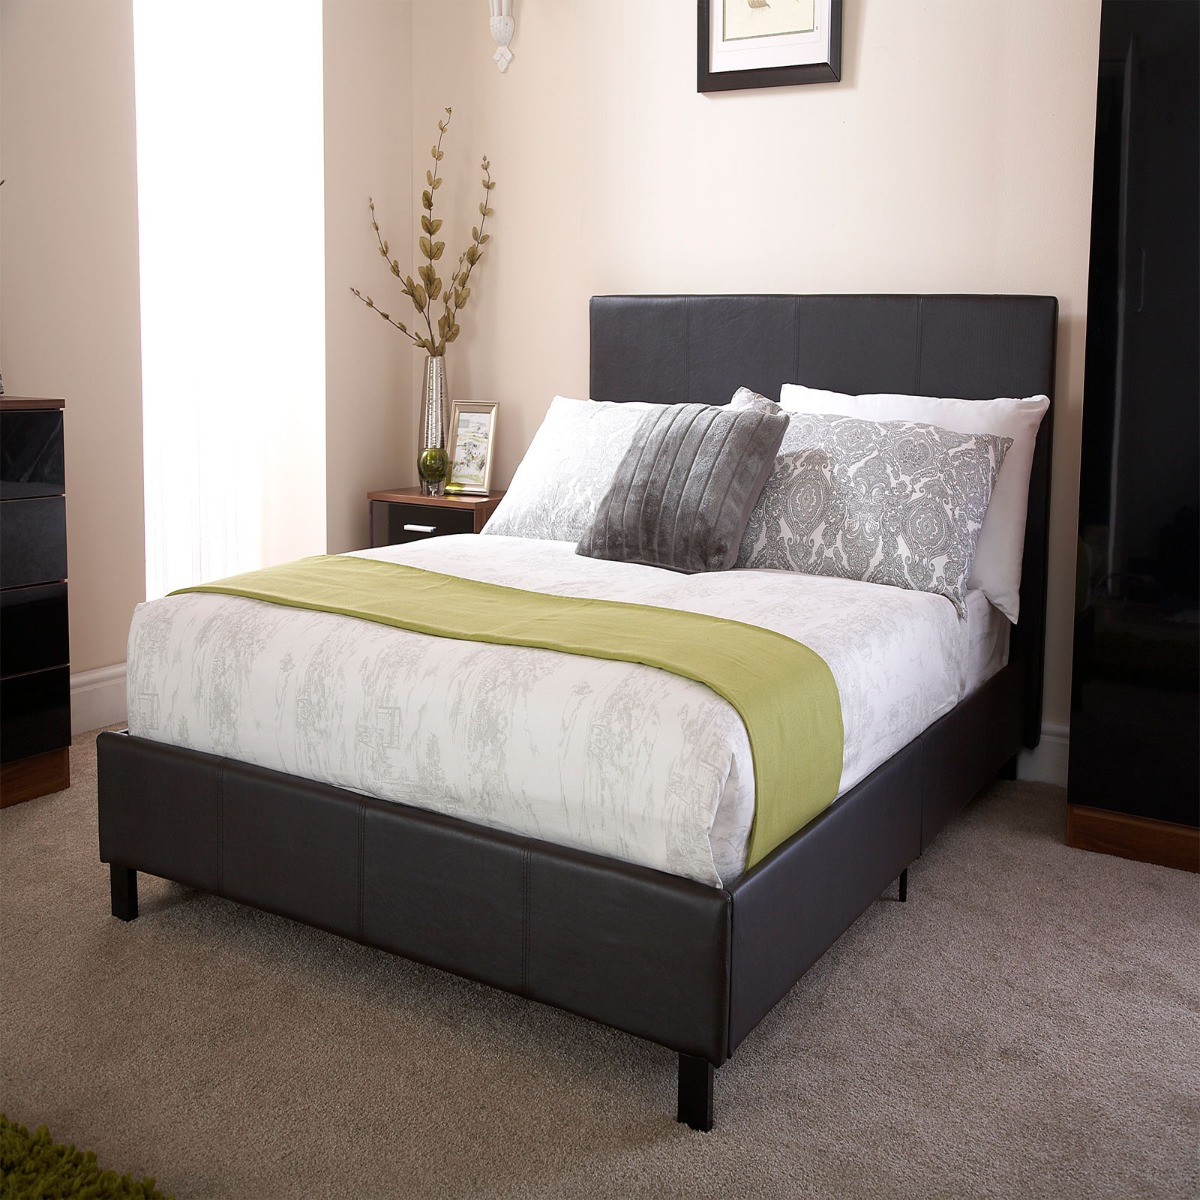 Faux Leather Bed in a Box - Black>